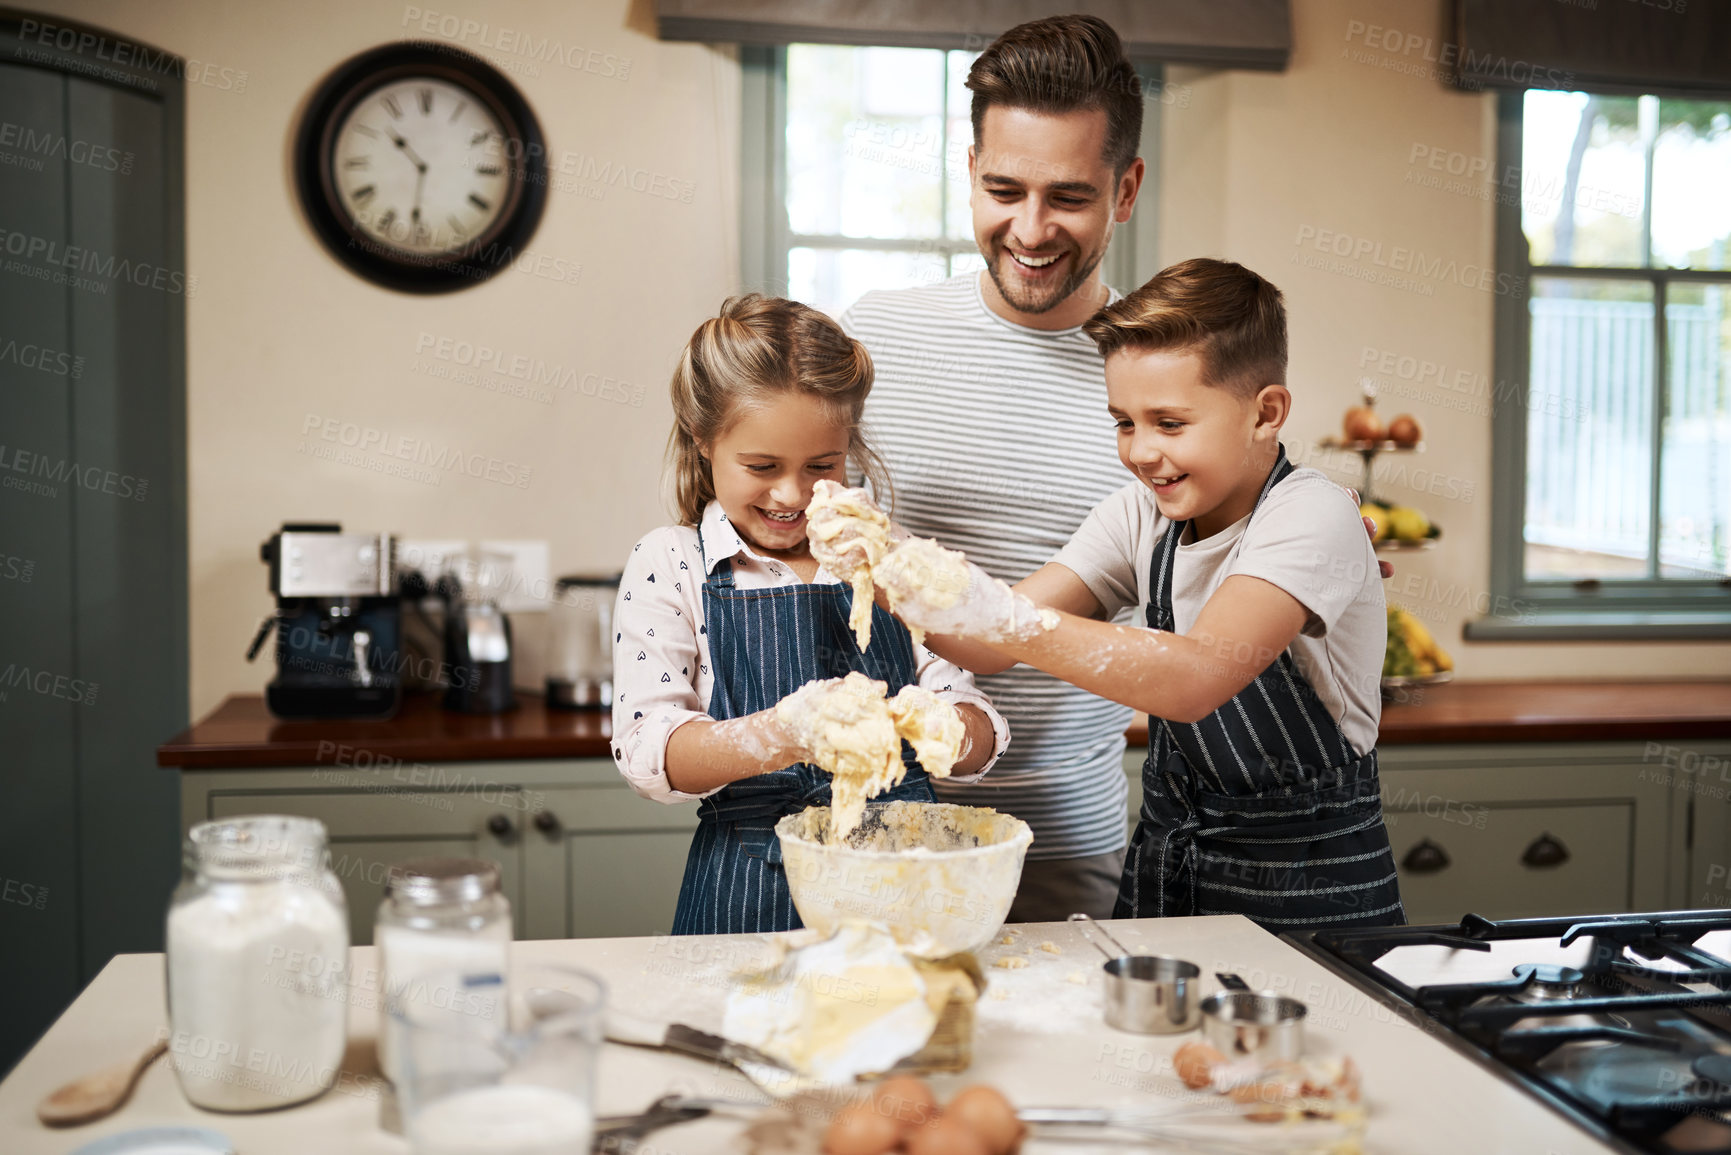 Buy stock photo Shot of a man and his two children baking in the kitchen at home